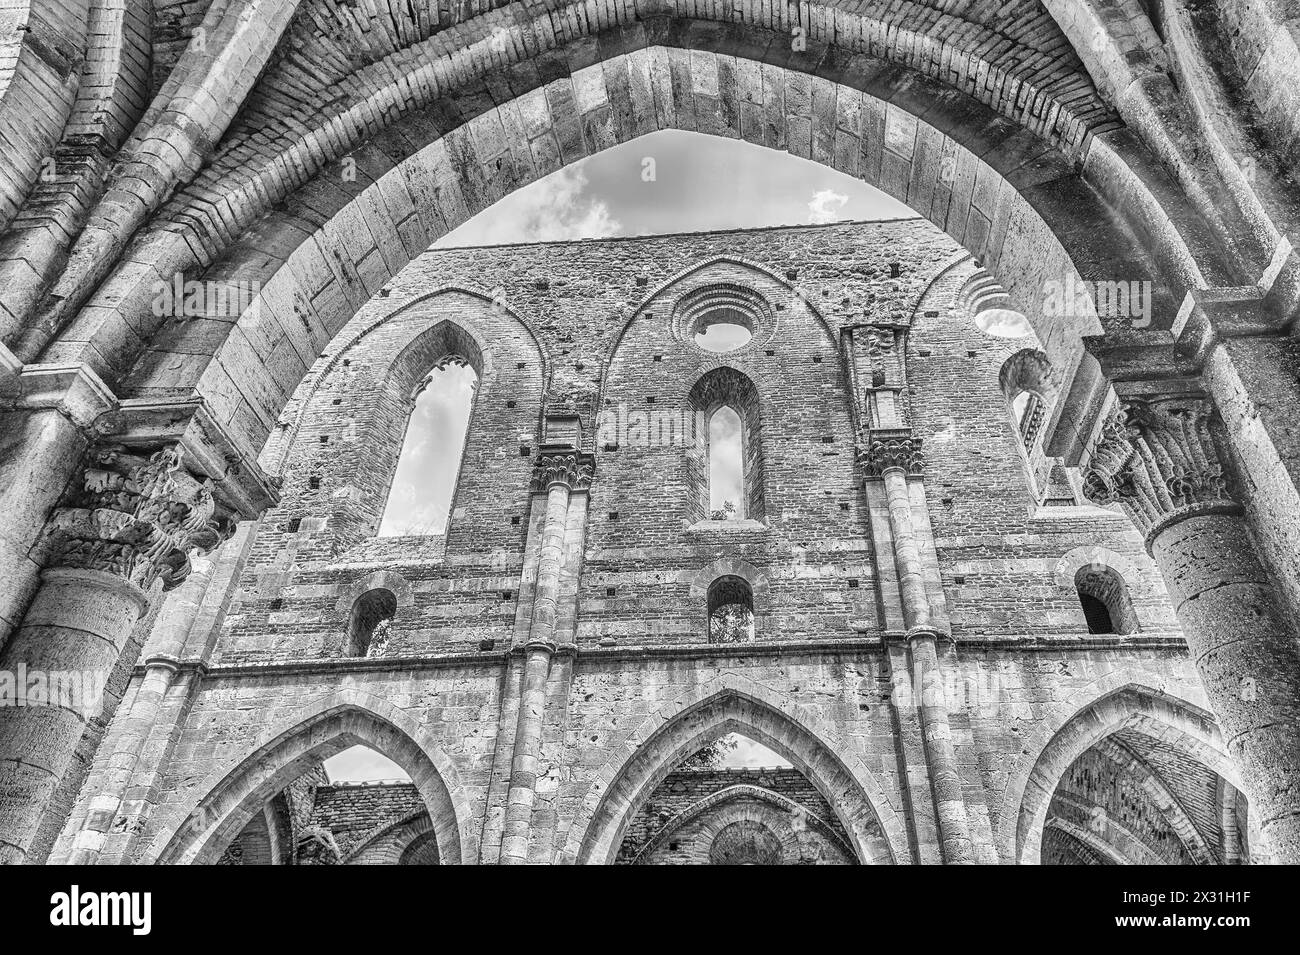 CHIUSDINO, ITALY - JUNE 22: Interior view of the iconic roofless Abbey of San Galgano, a Cistercian Monastery in the town of Chiusdino, province of Si Stock Photo